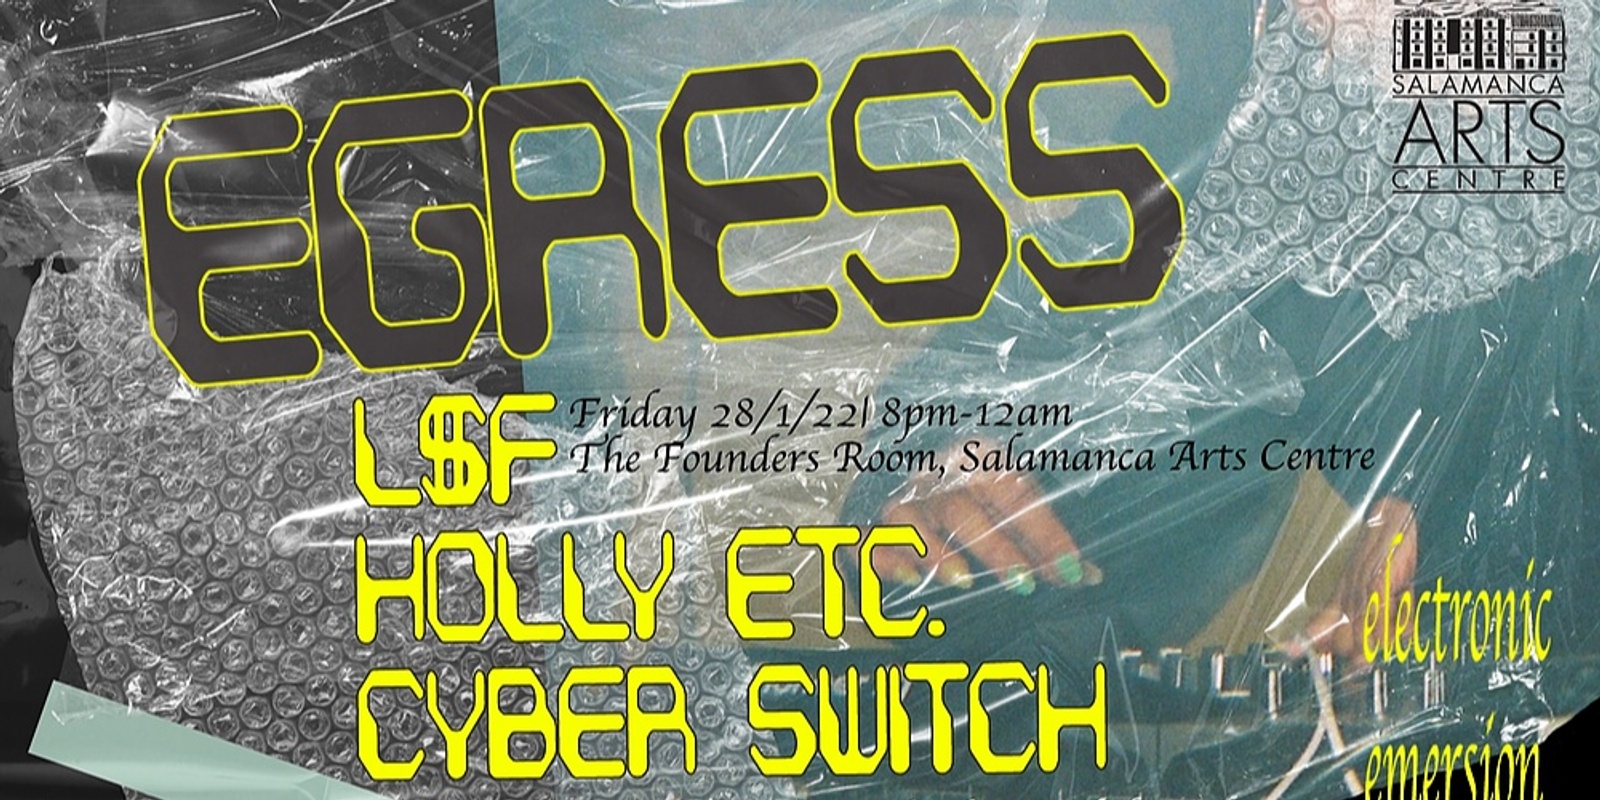 Banner image for EGRESS - CURATED BY BADDI ADI